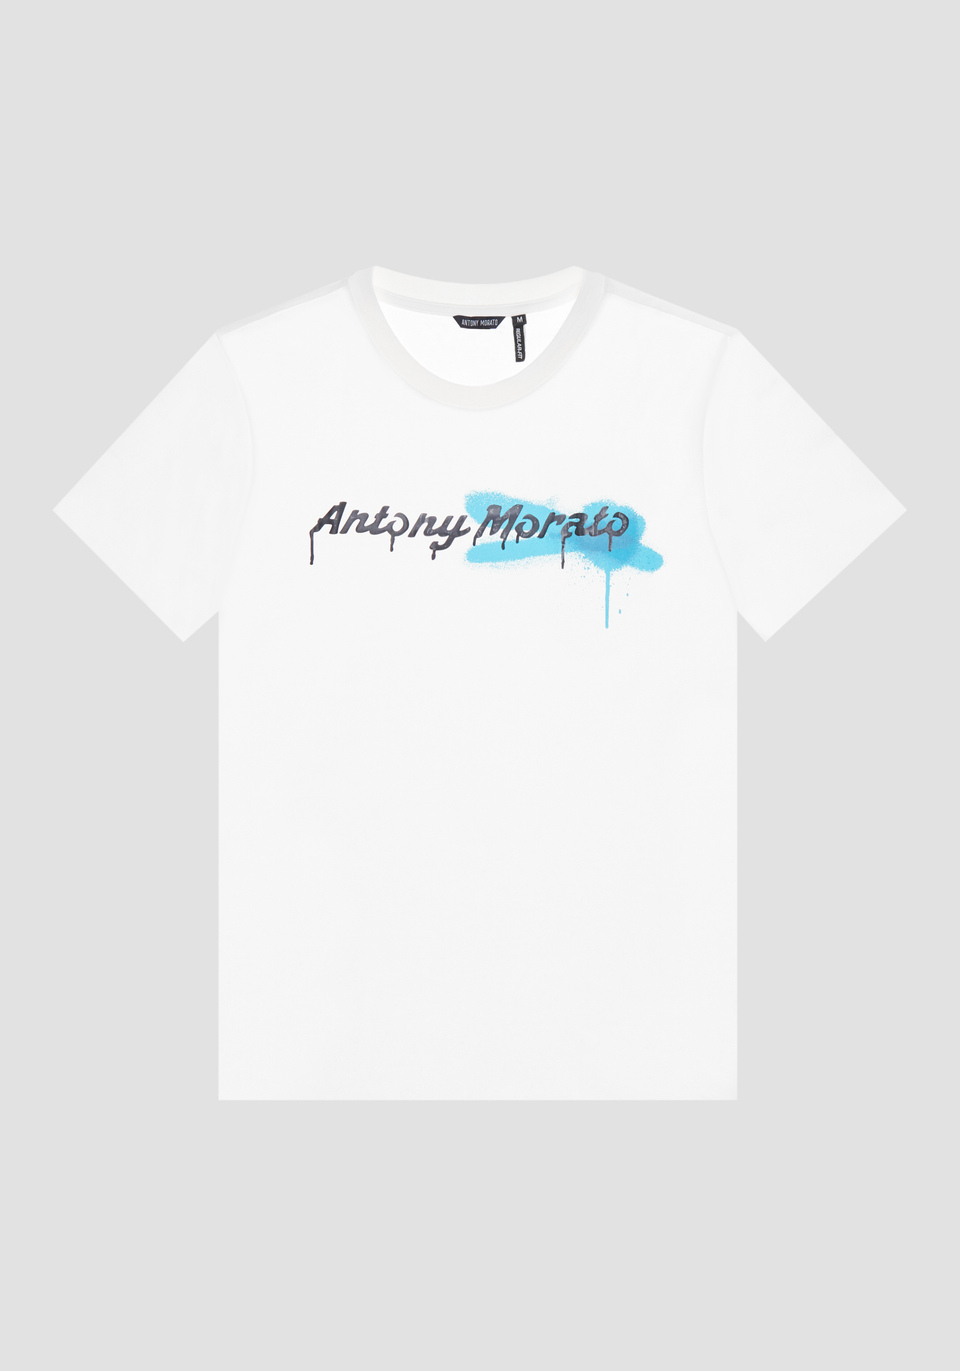 REGULAR-FIT T-SHIRT IN SOFT COTTON WITH SPRAY-EFFECT "MORATO" PRINT - Antony Morato Online Shop